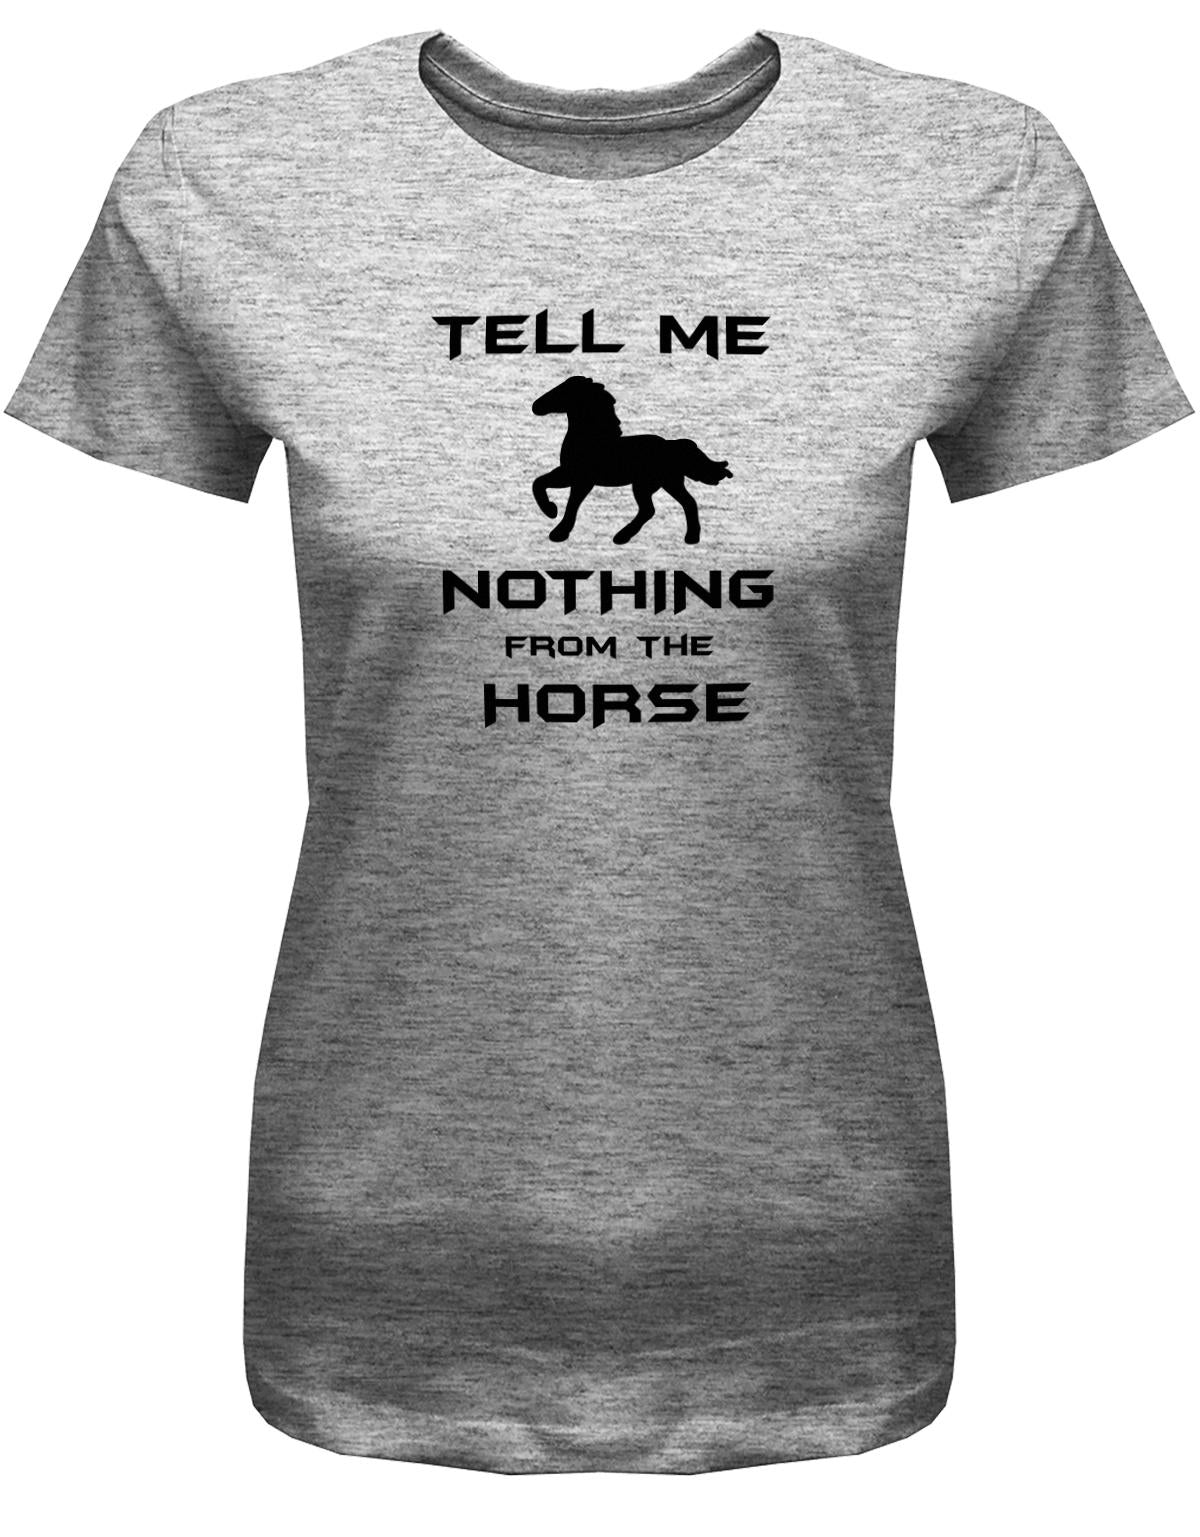 tell-me-nothing-from-the-Horse-Damen-Shirt-Grau